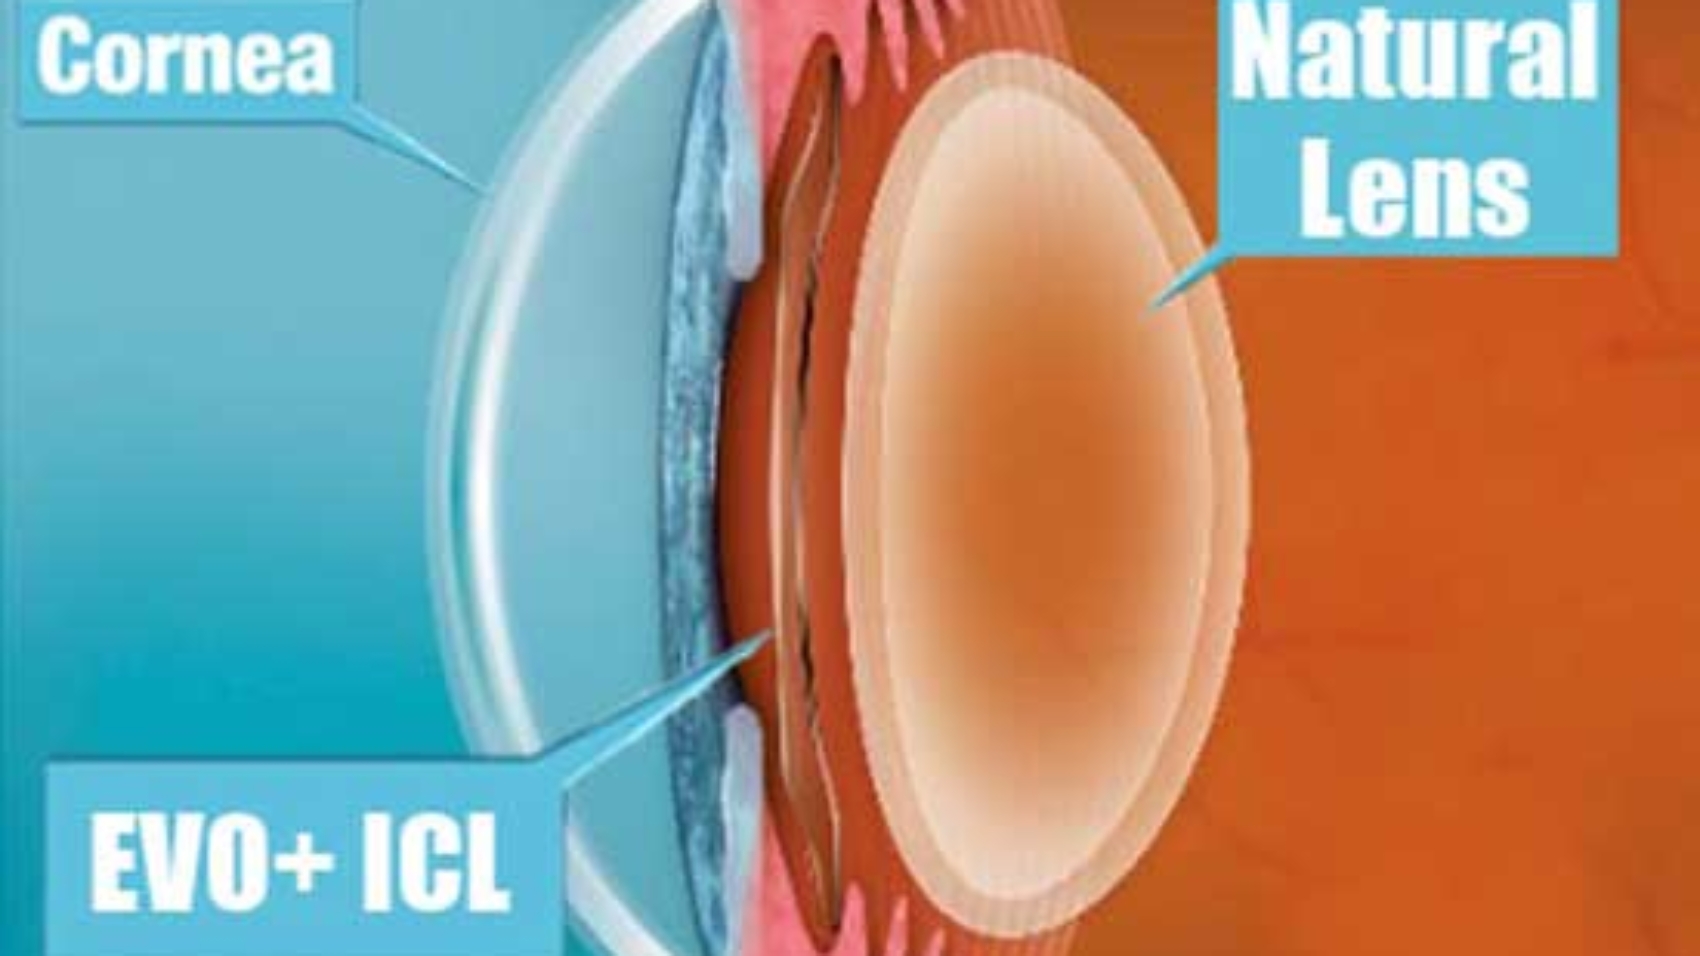 EVO-Visian-ICL-implanted-cross-section-position-2-feb-19